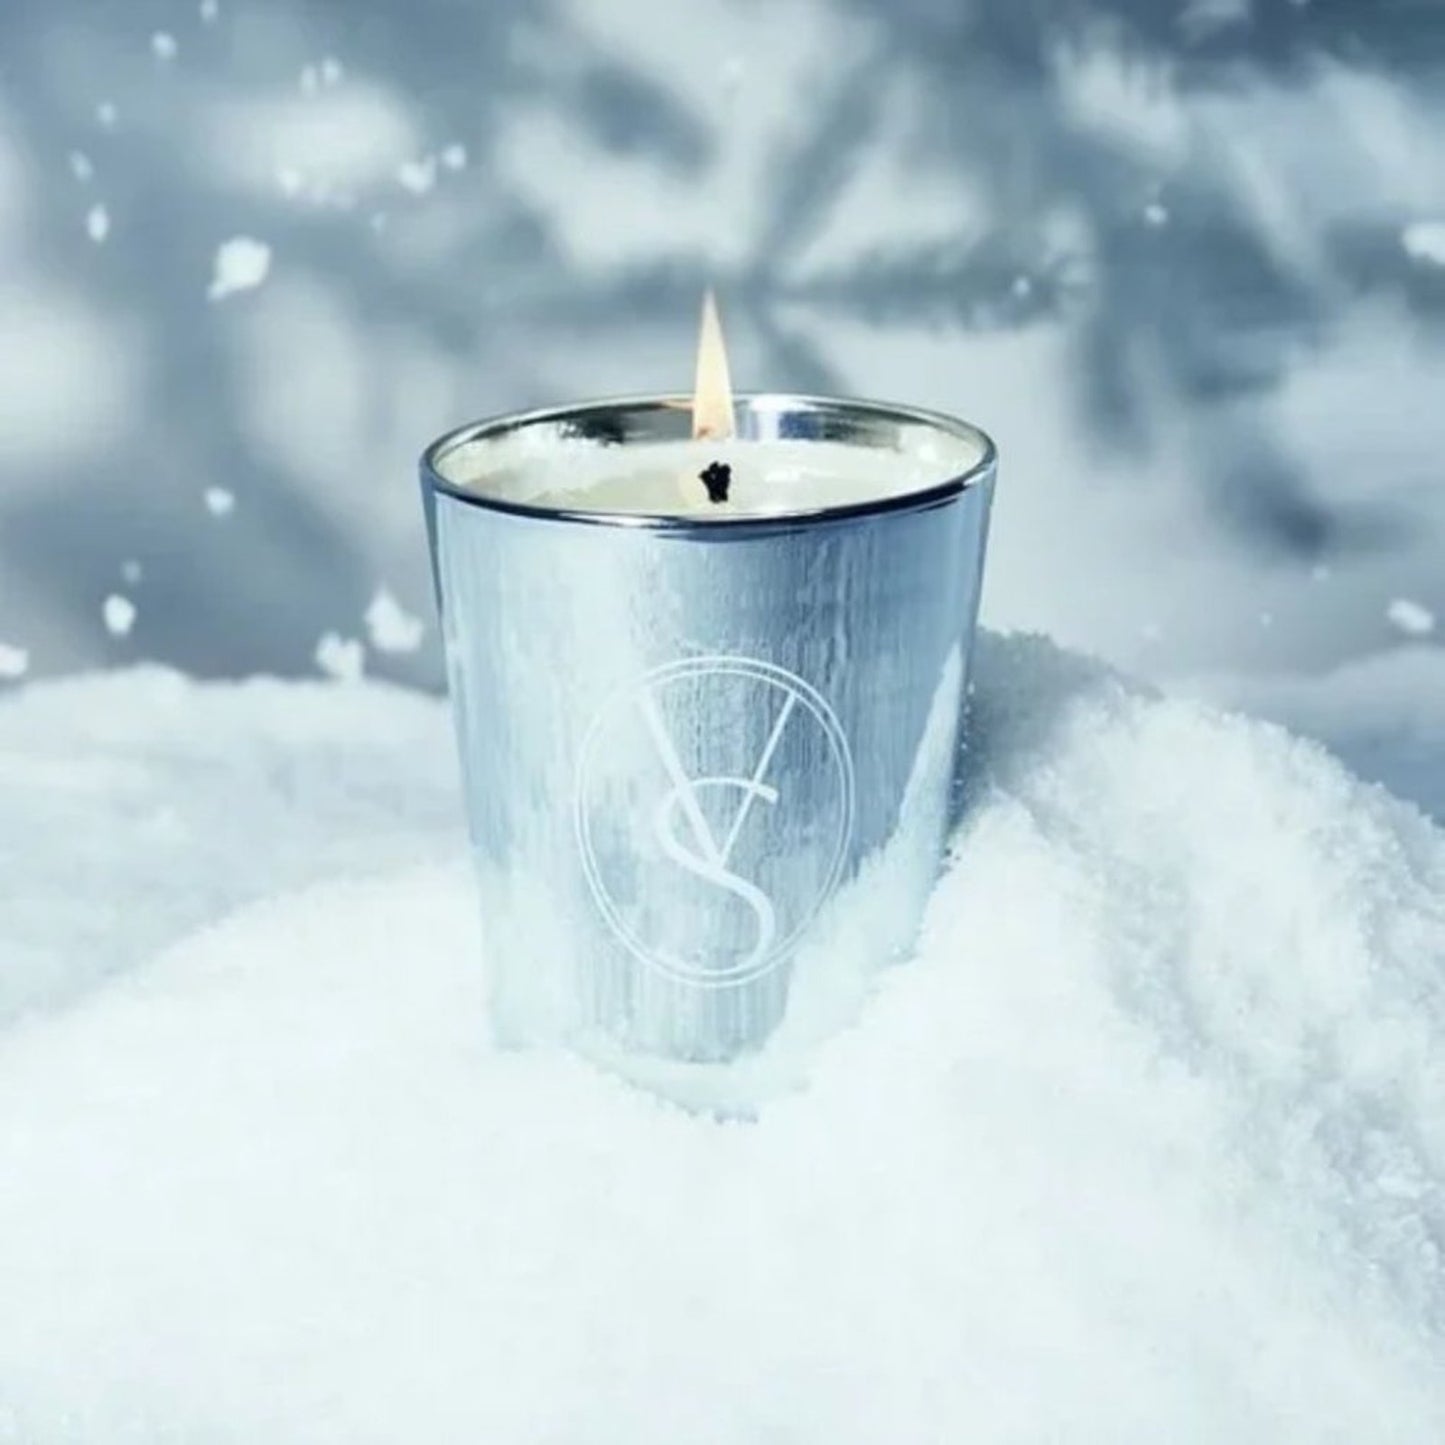 Victoria's Secret Snowglow Kaleidesnow Single Wick Scented Candle New in…